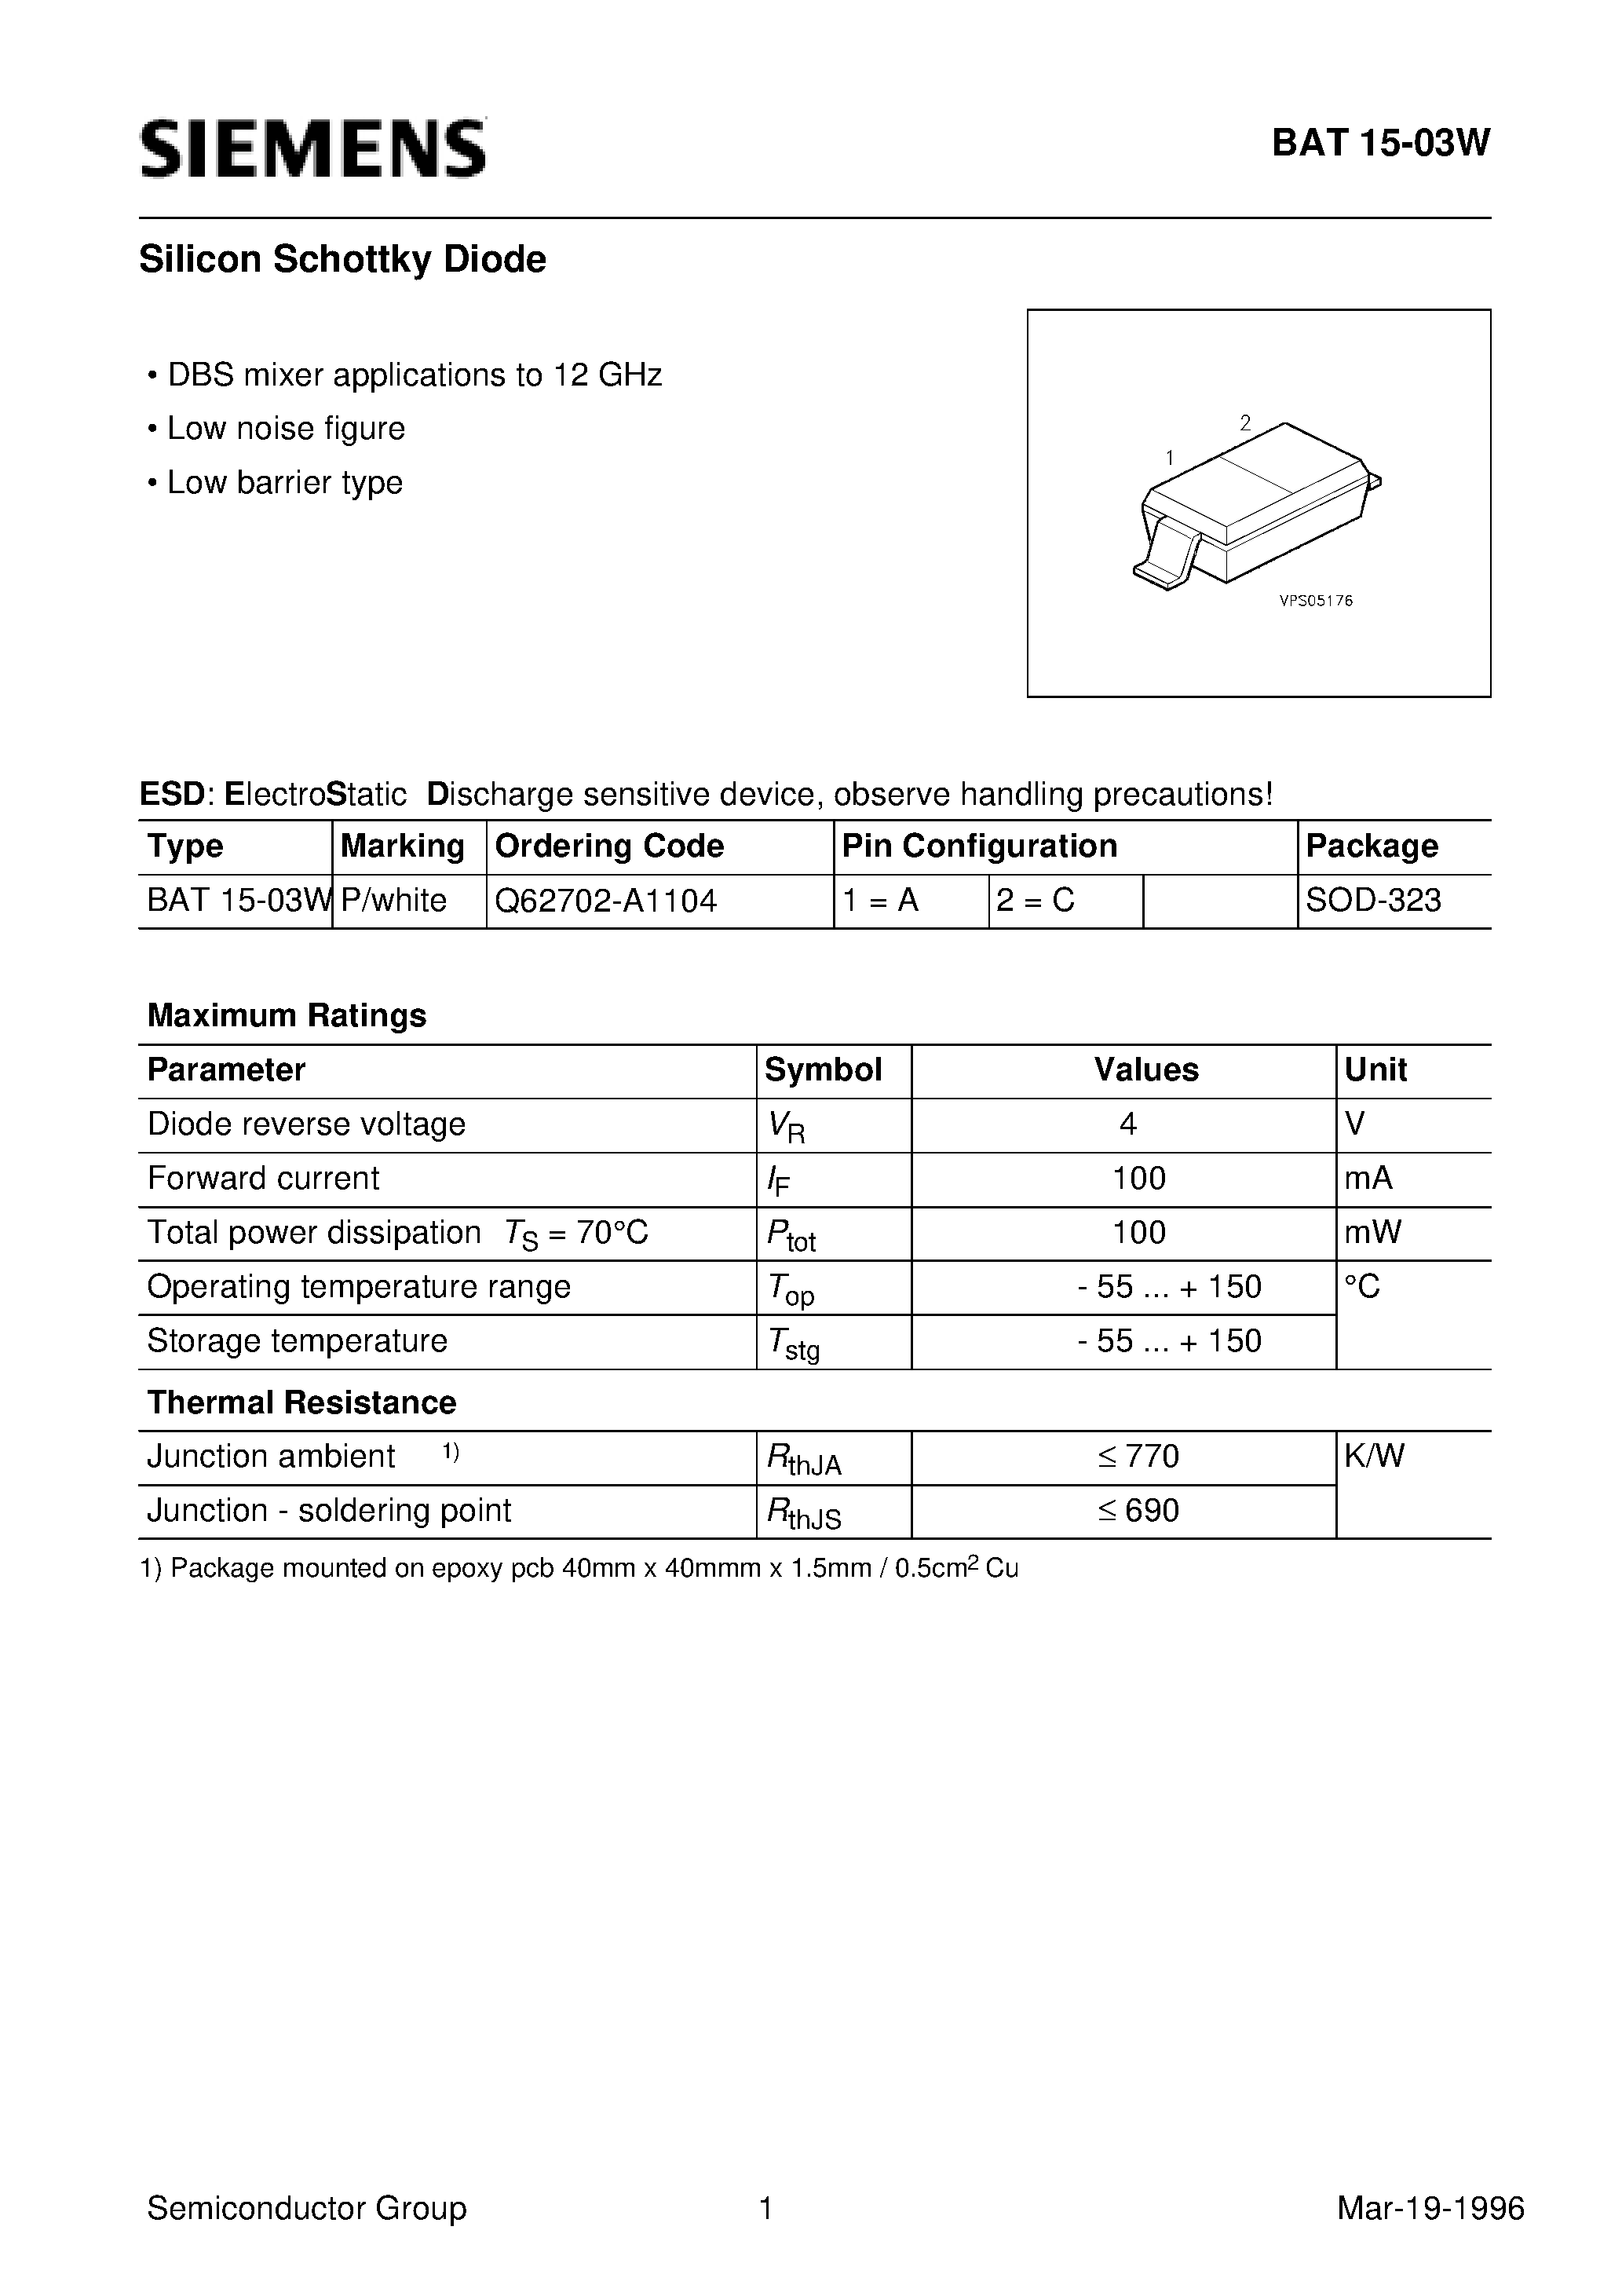 Даташит BAT15-03W - Silicon Schottky Diode (DBS mixer applications to 12 GHz Low noise figure Low barrier type) страница 1